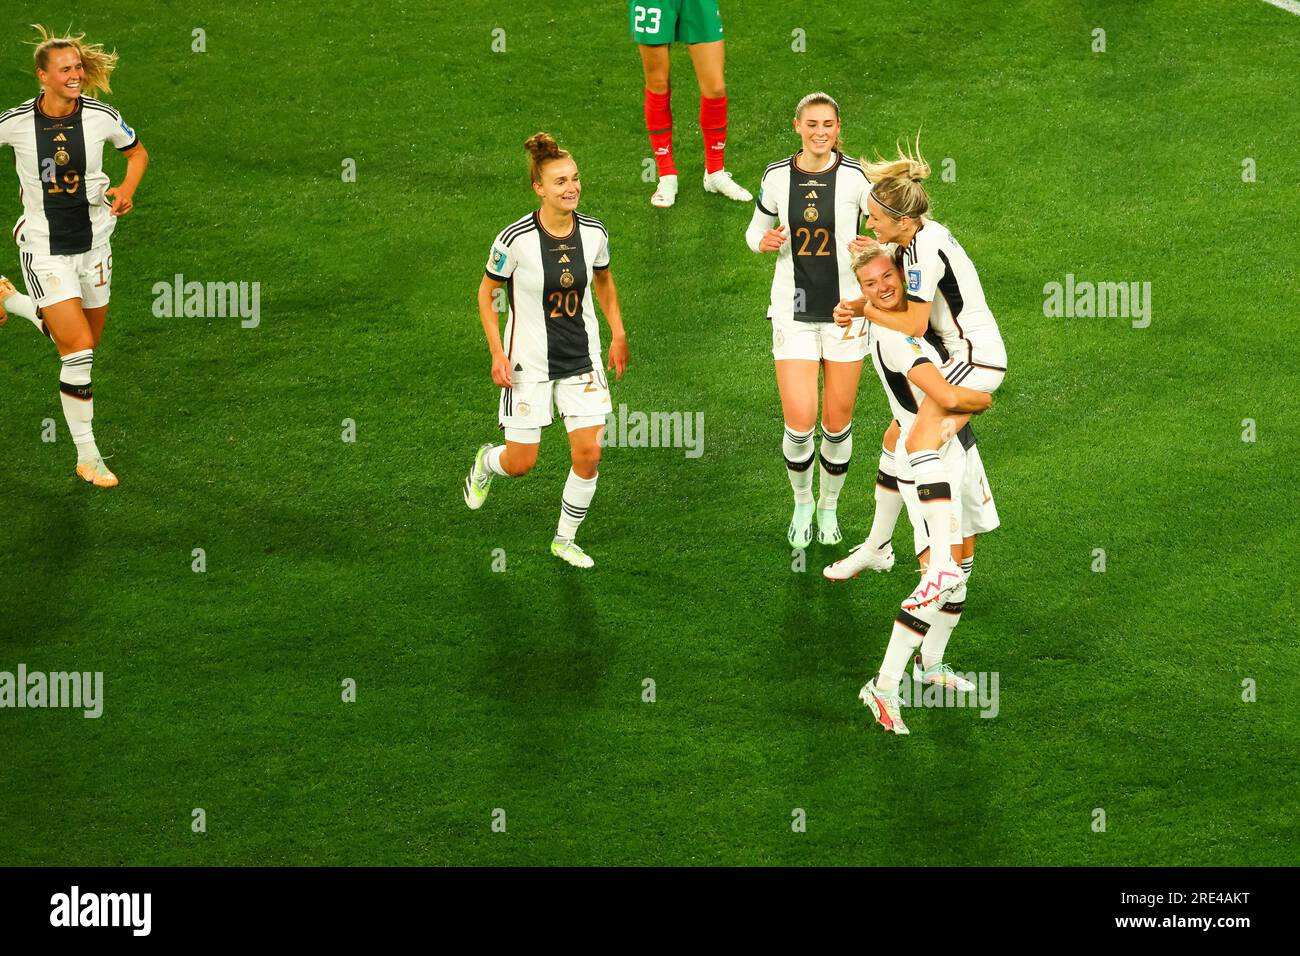 Alexandra Popp-Hoppe of Germany celebrates with her team after scoring a goal during the FIFA Women's World Cup Australia & New Zealand 2023 Group match between Germany and Morocco at Melbourne Rectangular Stadium. Germany won the game 6-0. Stock Photo